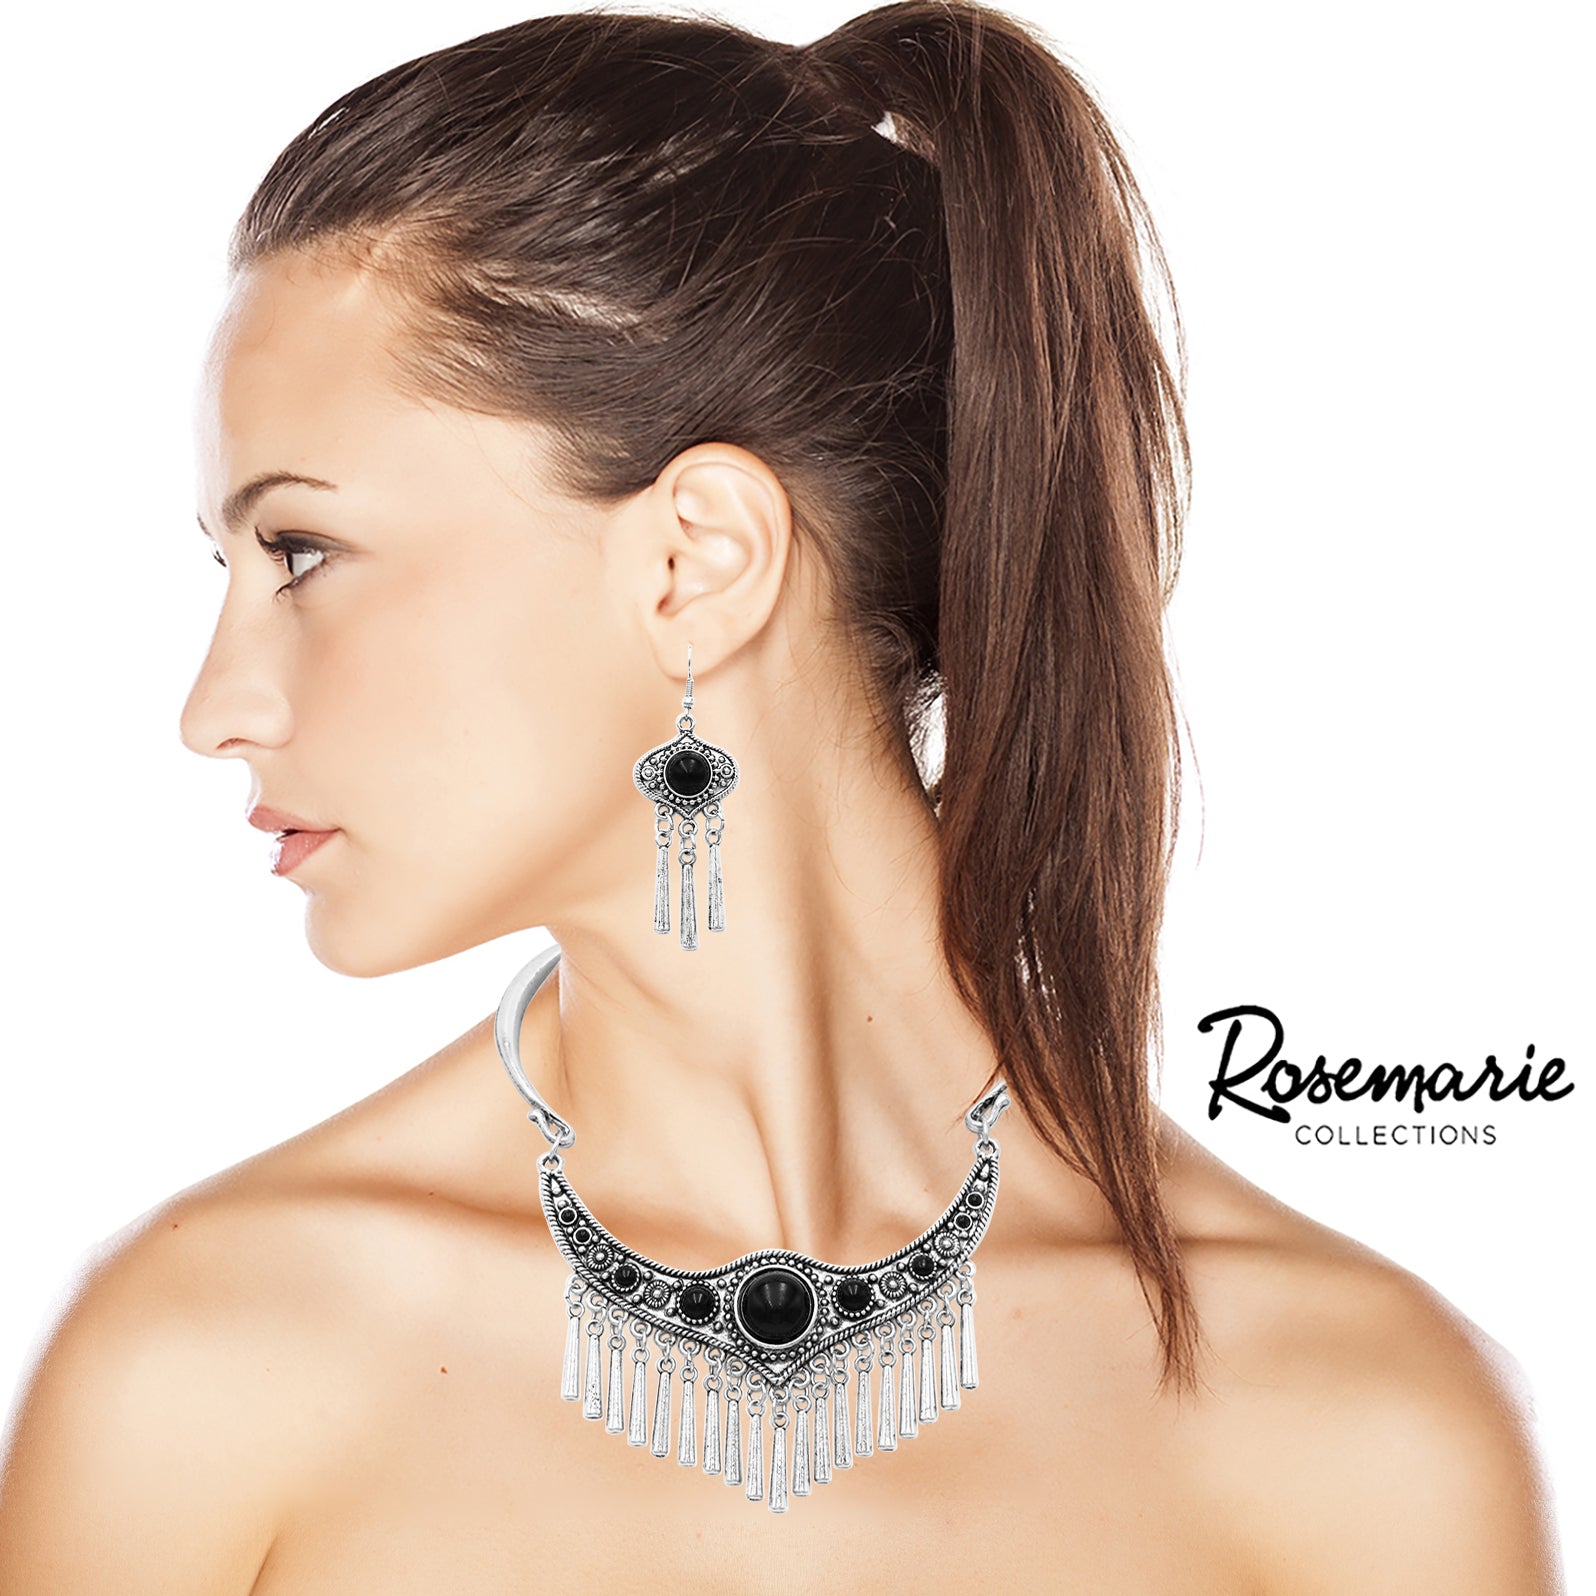 Western Style Statement Silver Tone Metal Fringe Natural Howlite Stone Collar Necklace Earrings Set, 11"+2" Extension (Black)